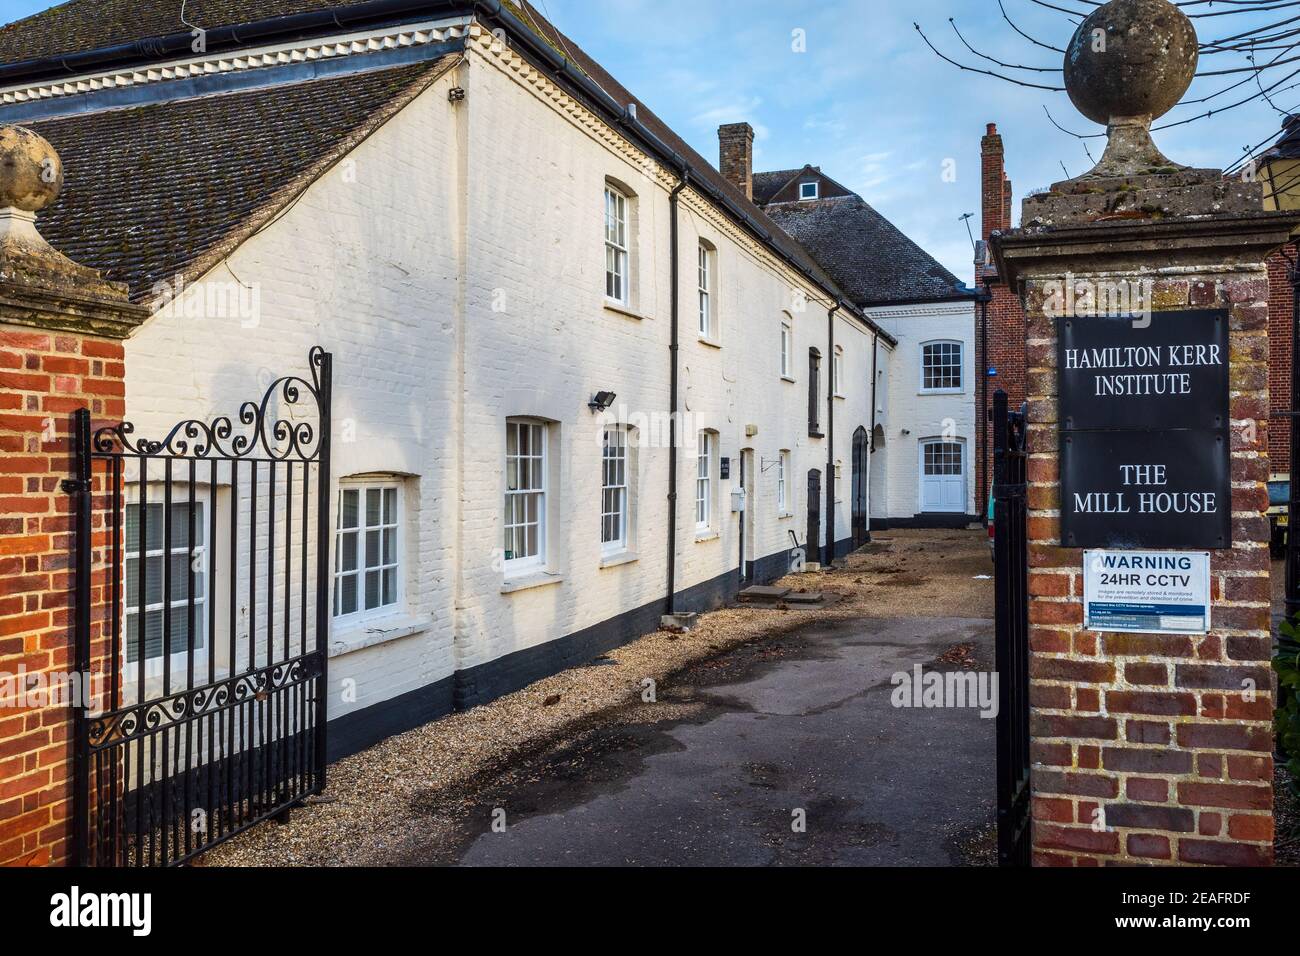 The Hamilton Kerr Institute site at Whittlesford Cambridge. A branch of the Fitzwilliam Museum specialising in the study & conservation of paintings. Stock Photo